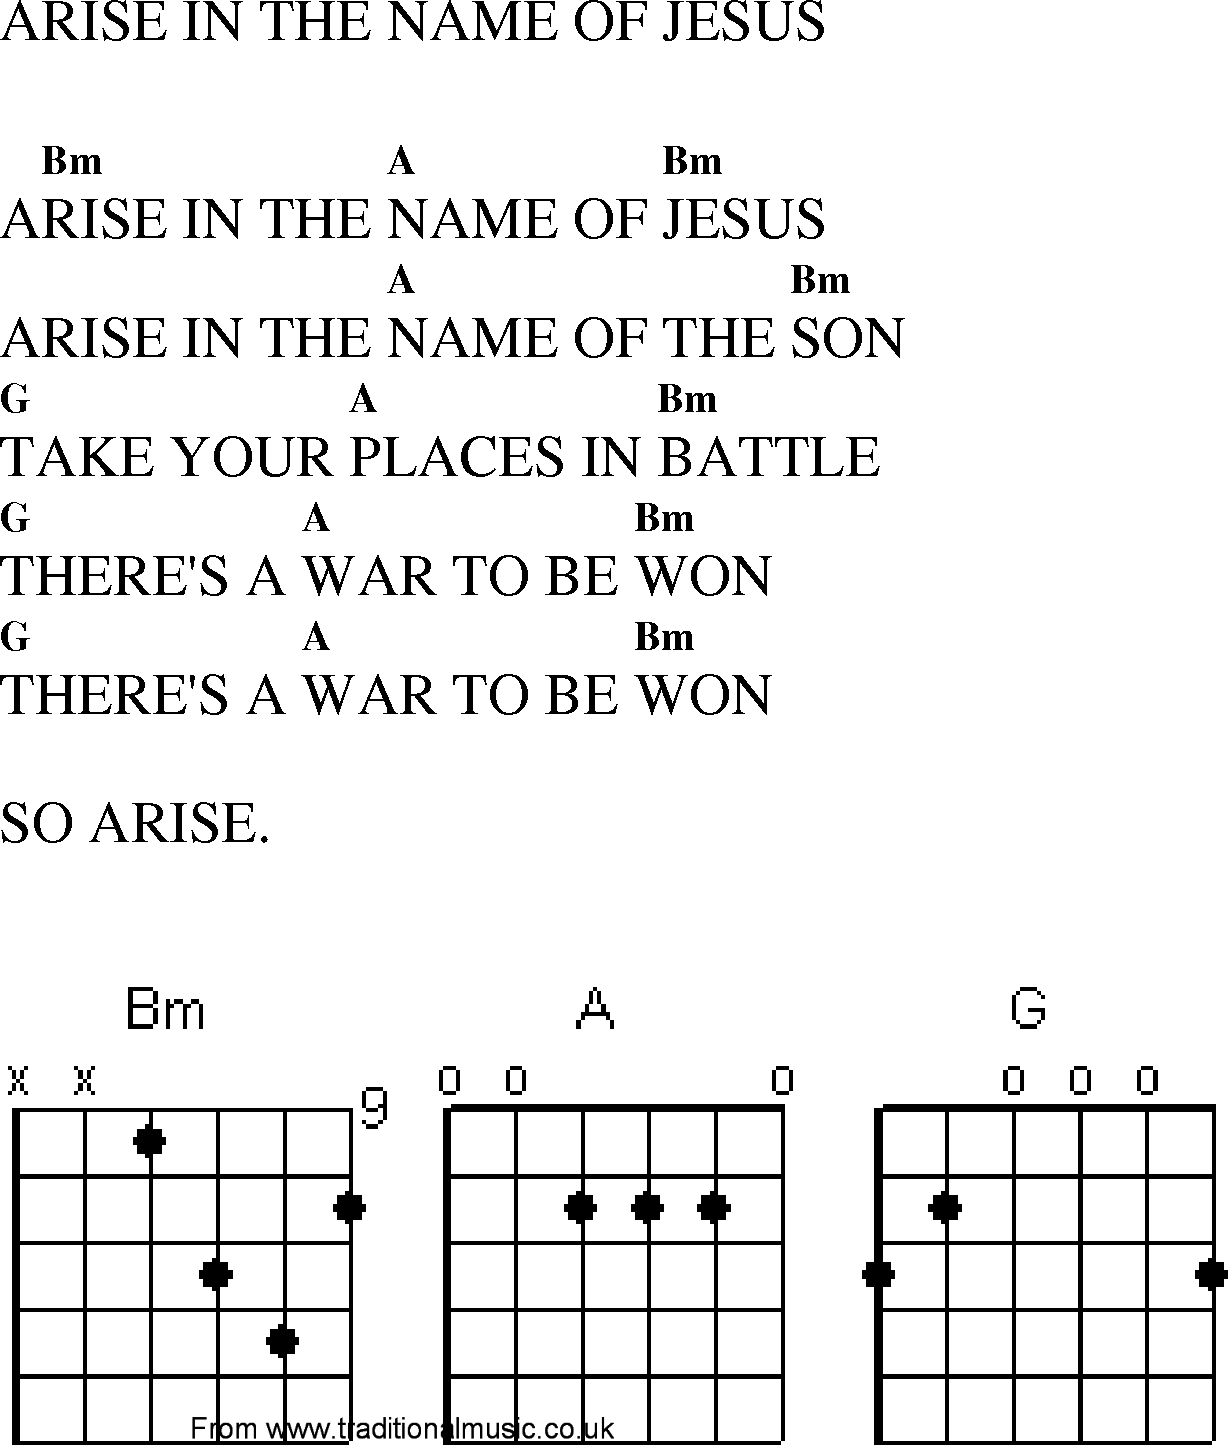 Gospel Song: arise_in_the_name_of_jesus, lyrics and chords.